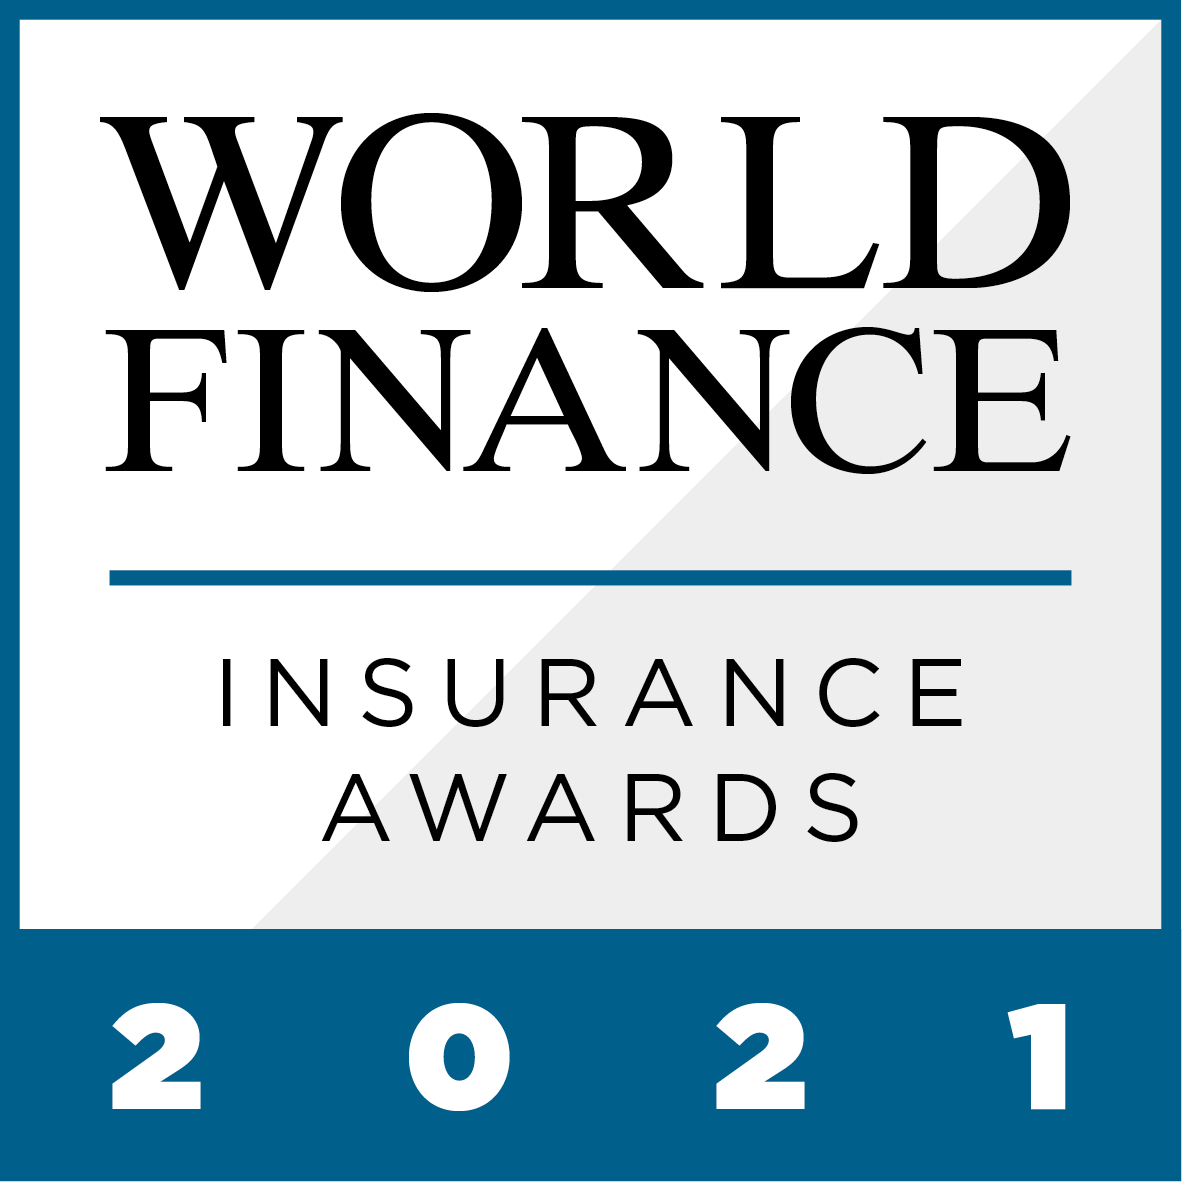 Please see below the full list of the Global Insurance Awards 2021, as awarded by World Finance magazine